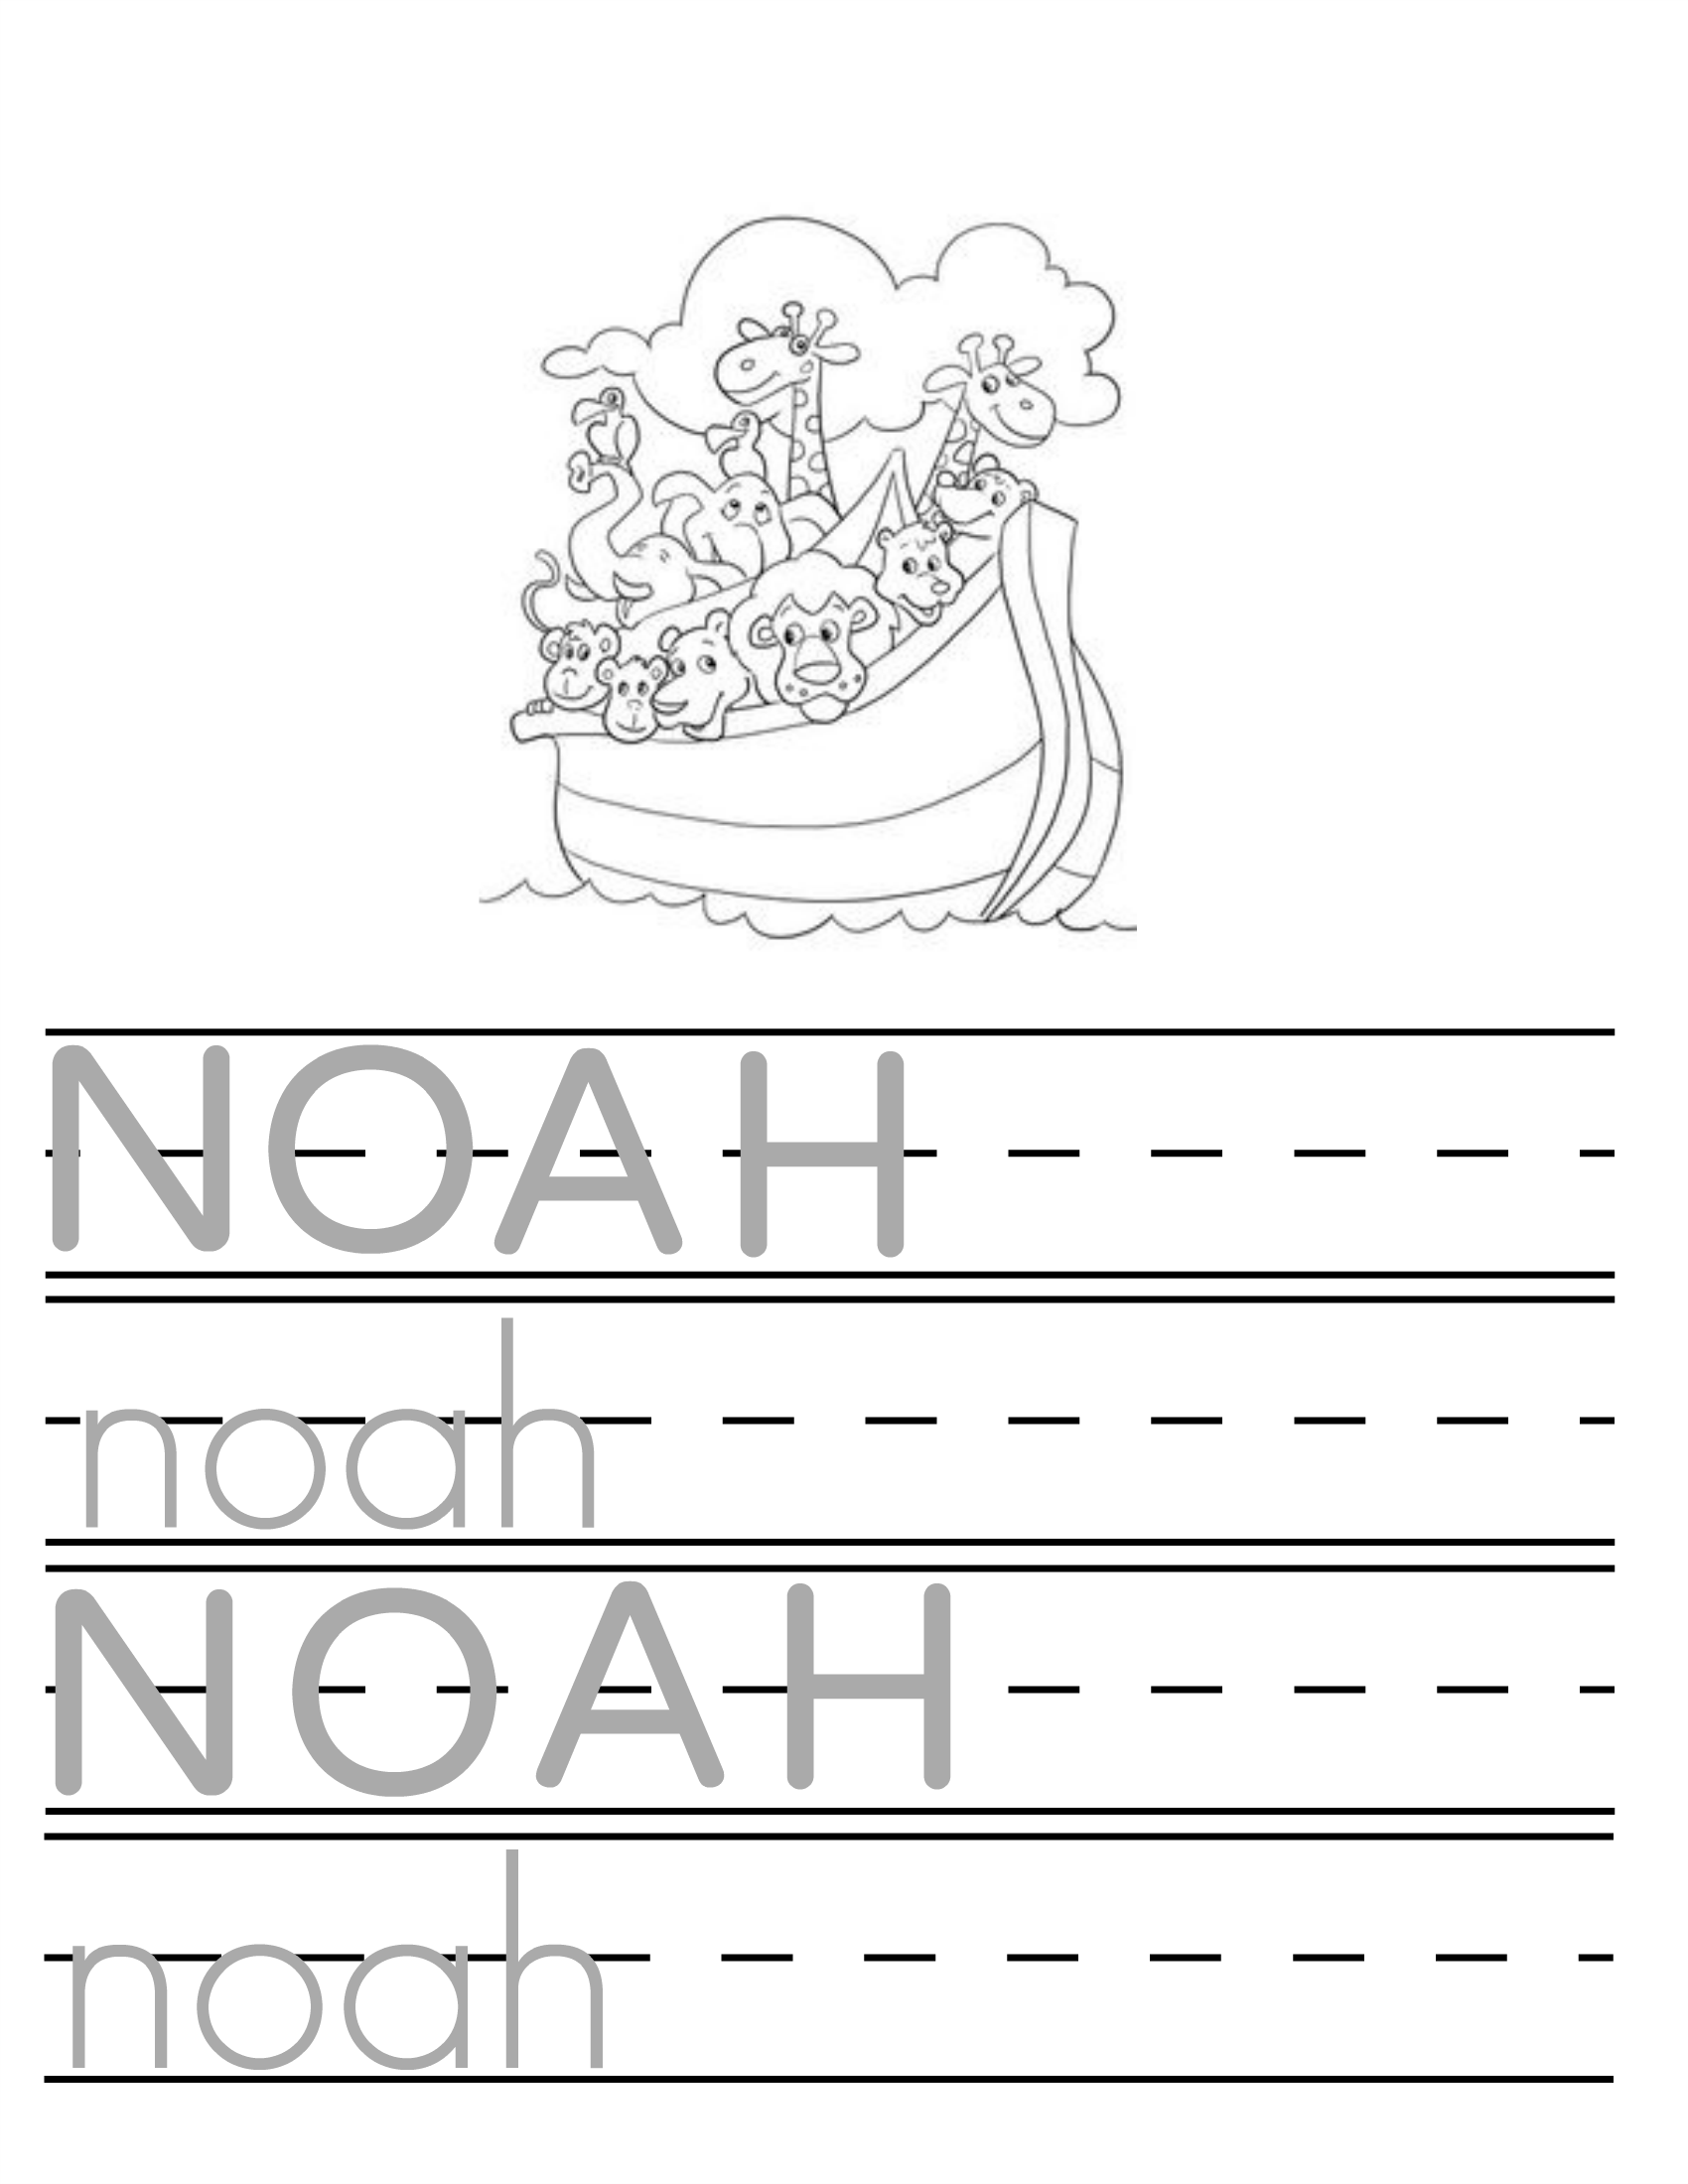 Teach Your Child To Write Their Name In 2020 | Kids Writing within Name Tracing Noah